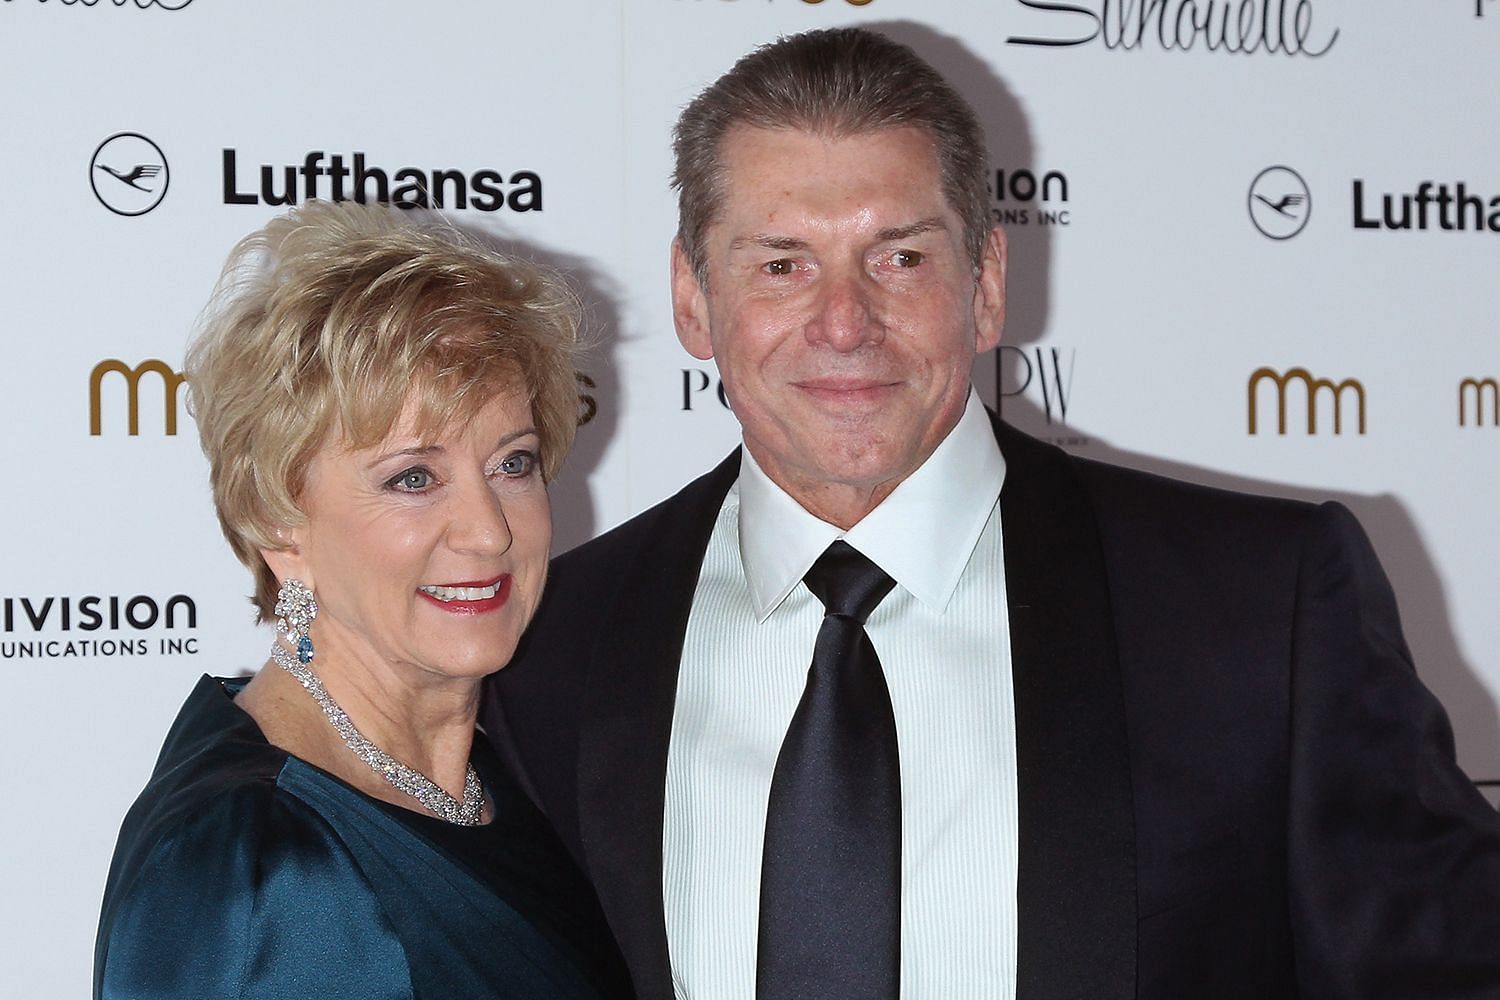 Vince McMahon and Linda McMahon at a public appearance